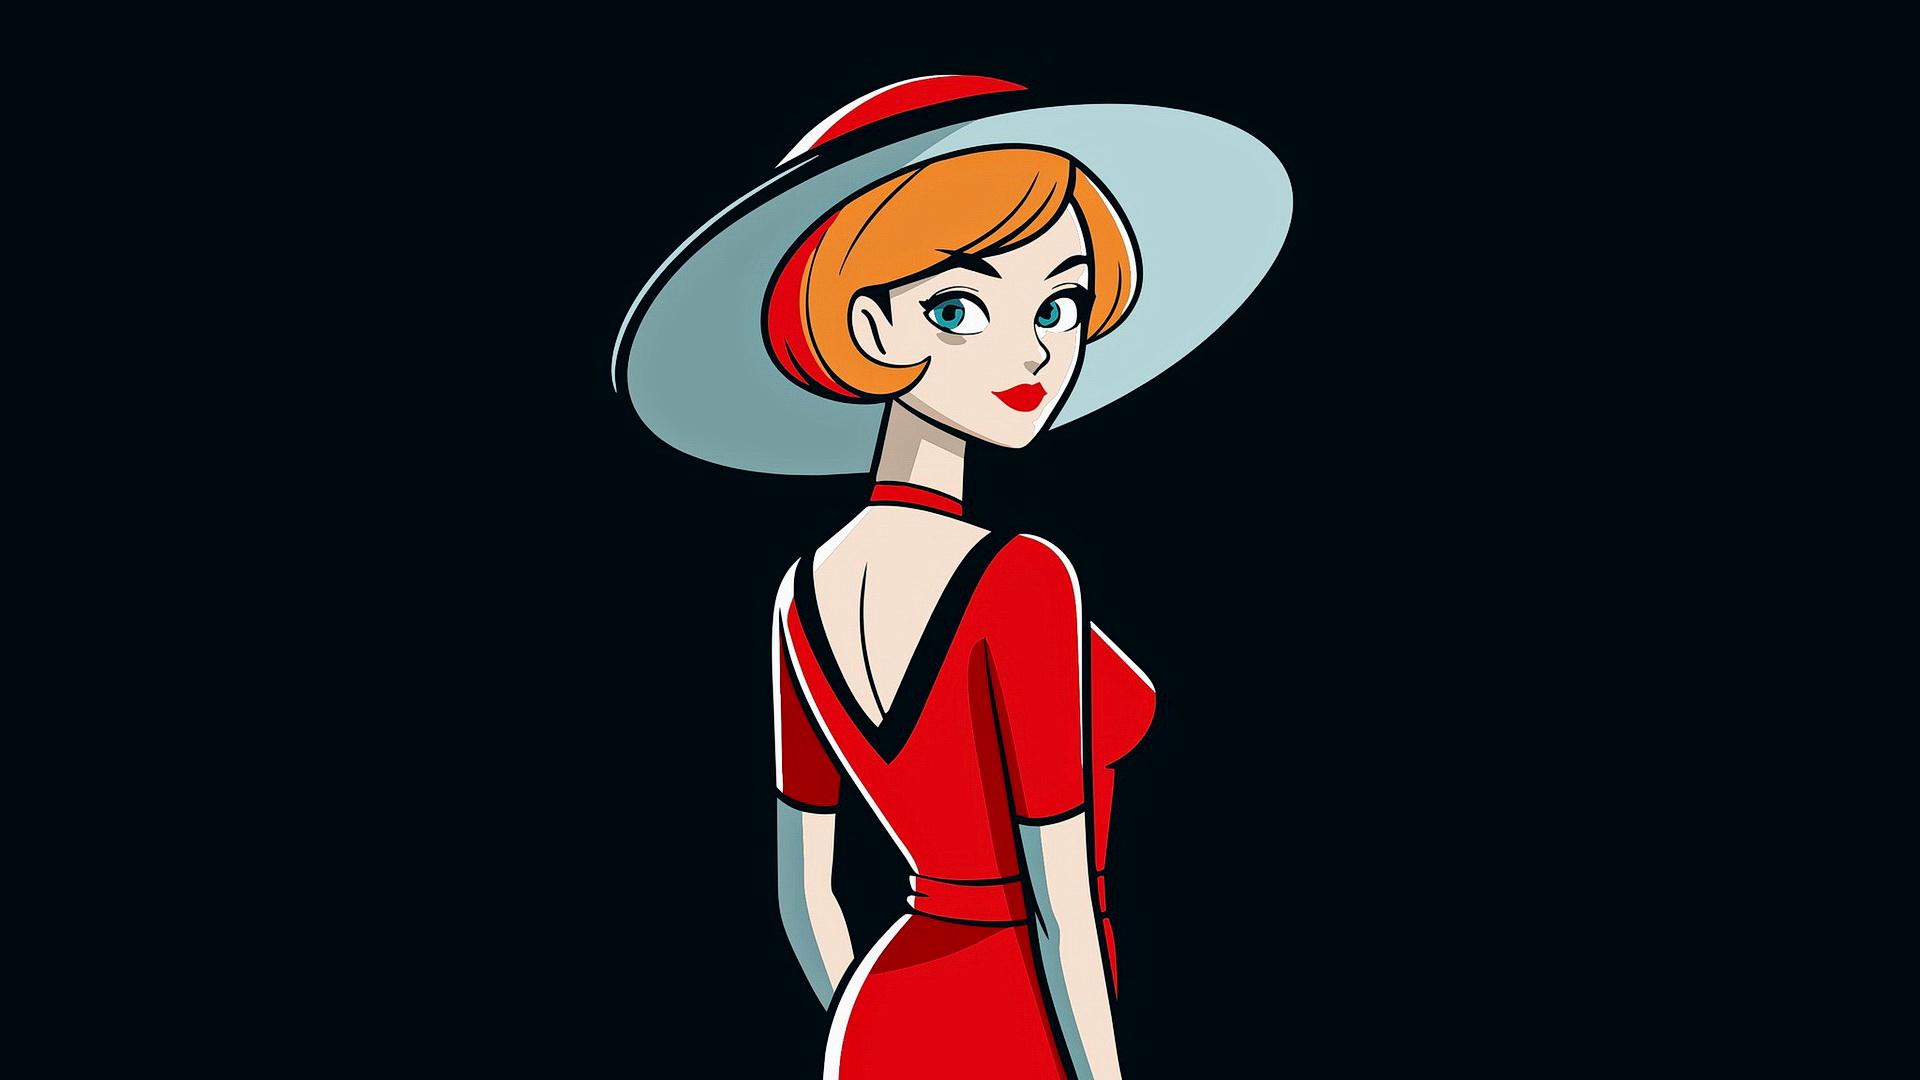 Free photo Drawing of a girl in a red dress and hat standing on a black background